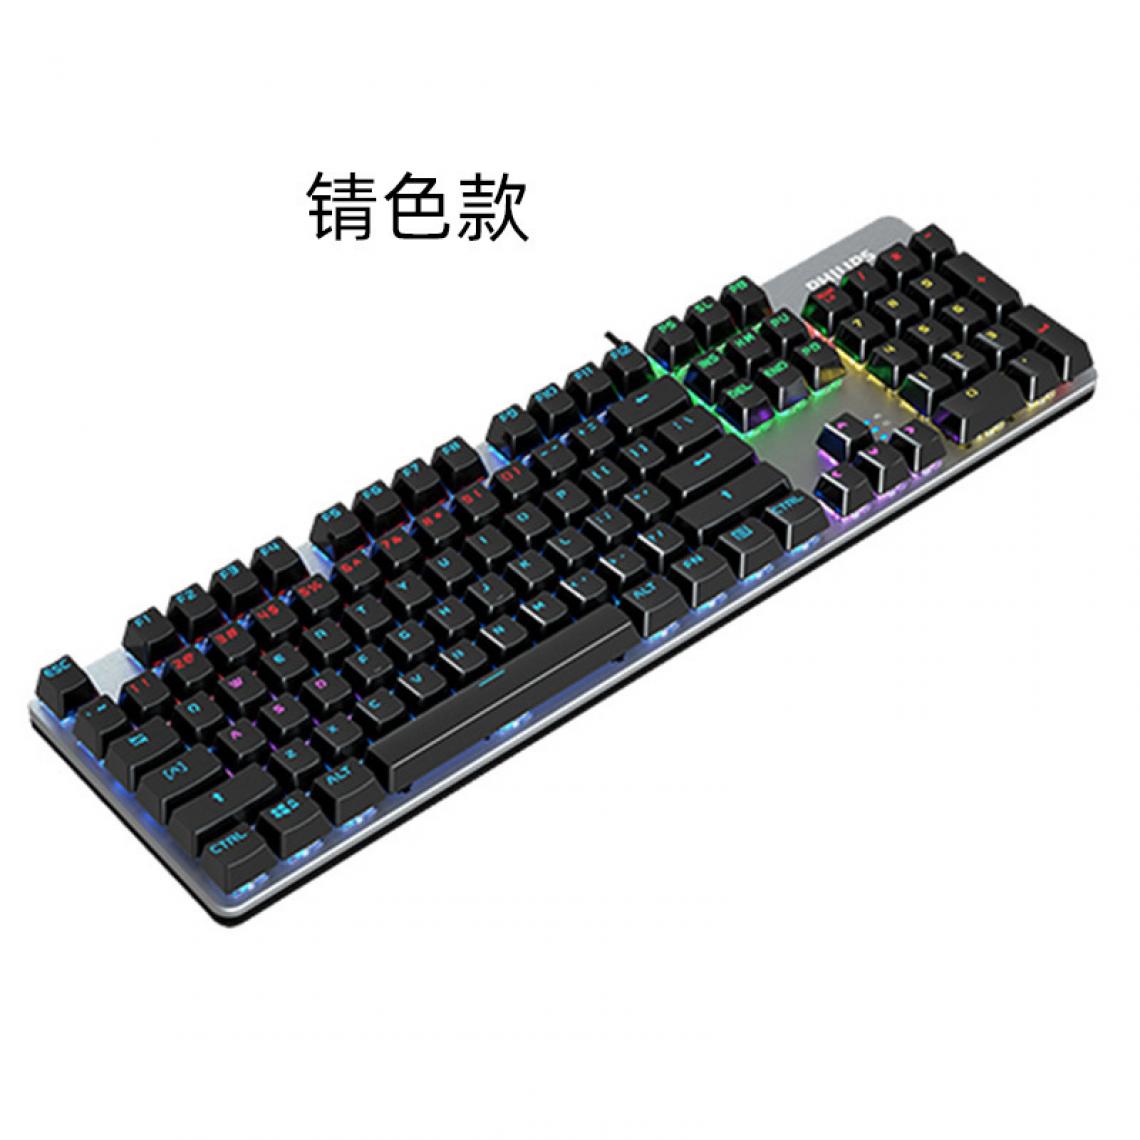 Gengyouyuan - Philips SPK8401 True Mechanical Keyboard Blue Axis Esports Gaming Clavier filaire - Clavier